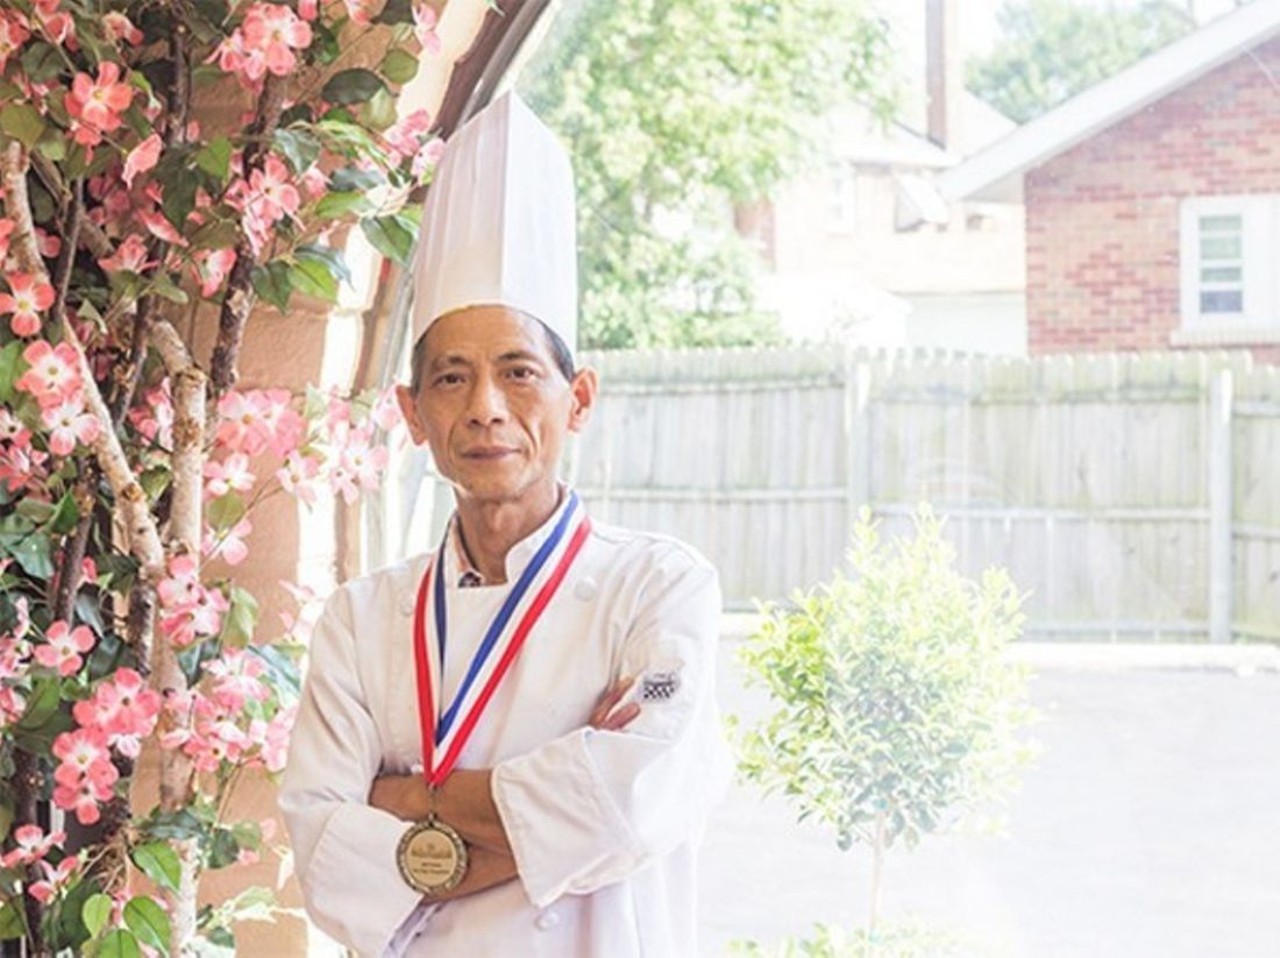 Best Chinese Restaurant: Chef Ma&#146;s Chinese Gourmet
(10440 Page Avenue, Overland; 314-395-8797)
Chef Ying Jing Ma may be gone, but his employees are carrying on his legacy. Read about his "otherwordly recipes" that will carry his memory here.
Photo credit: Mabel Suen